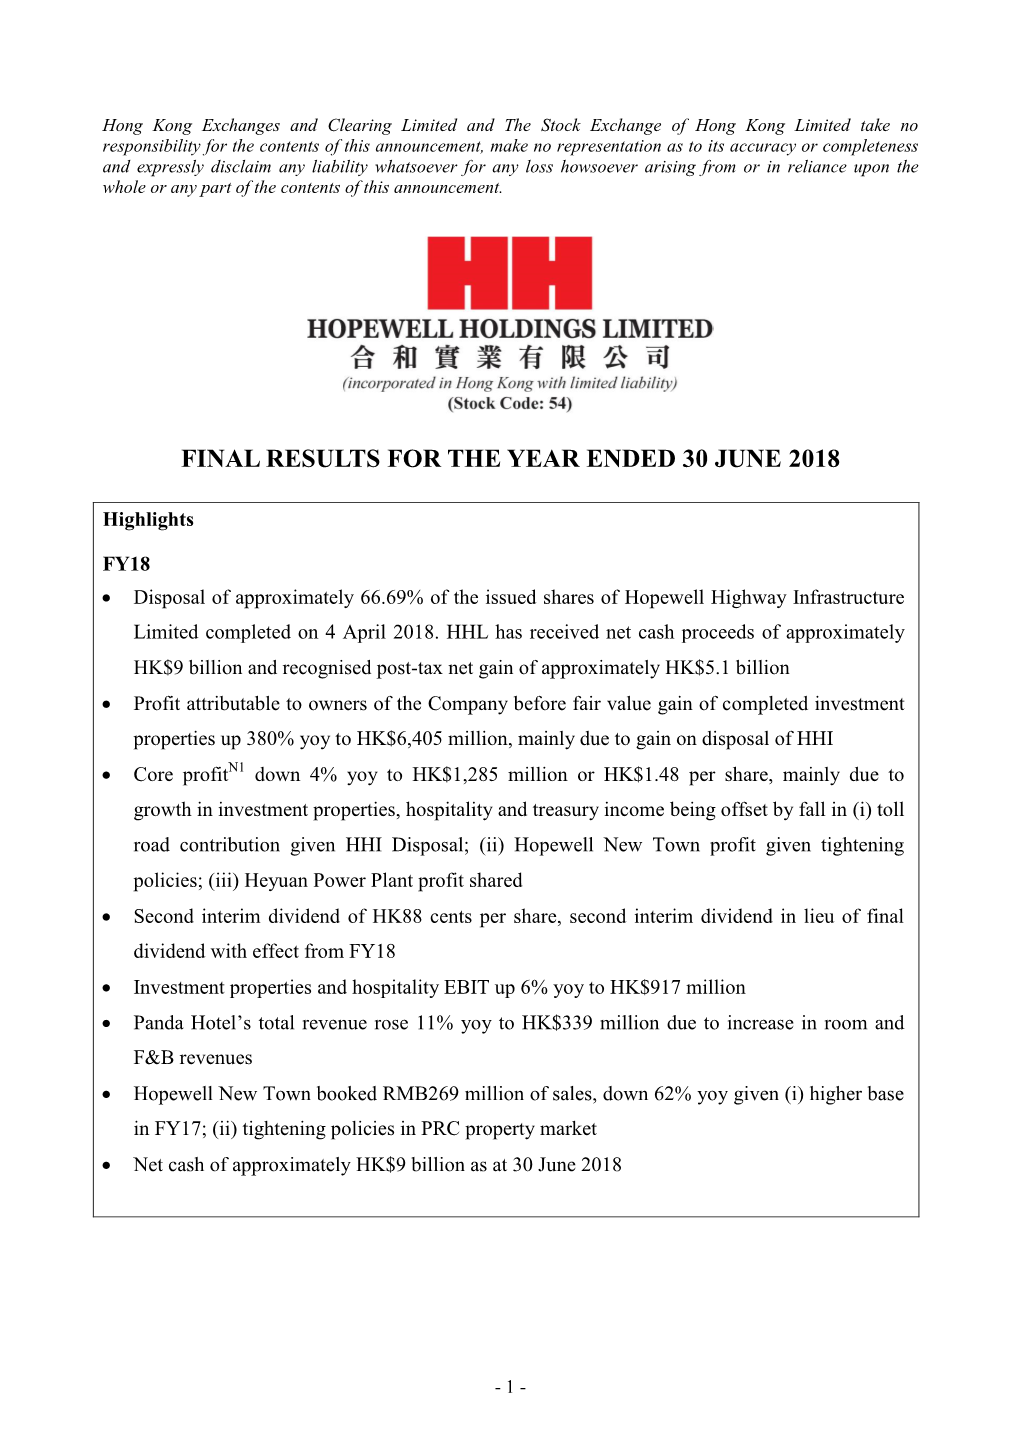 Final Results for the Year Ended 30 June 2018